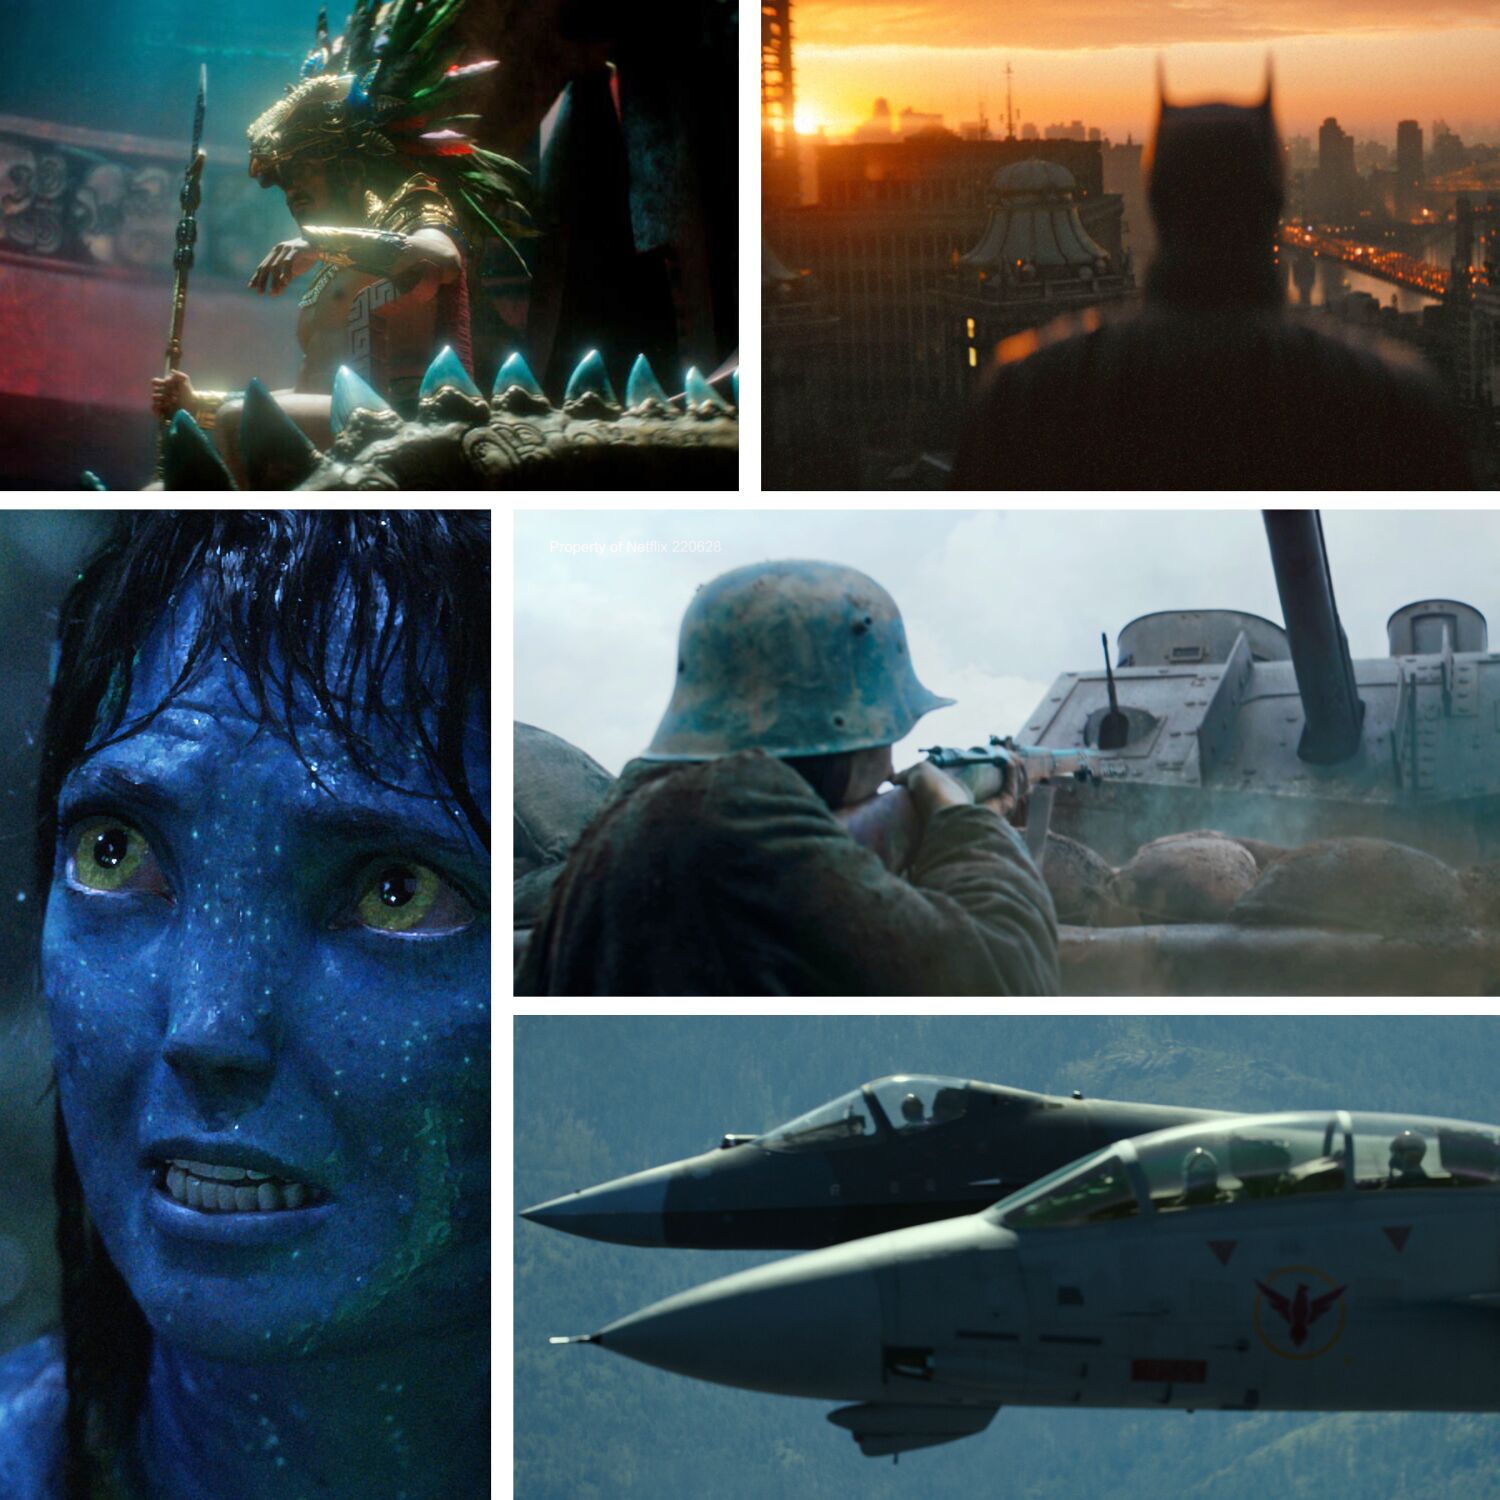 Visual effects nominees, in the mix from the get-go, are eroding cinema's limits